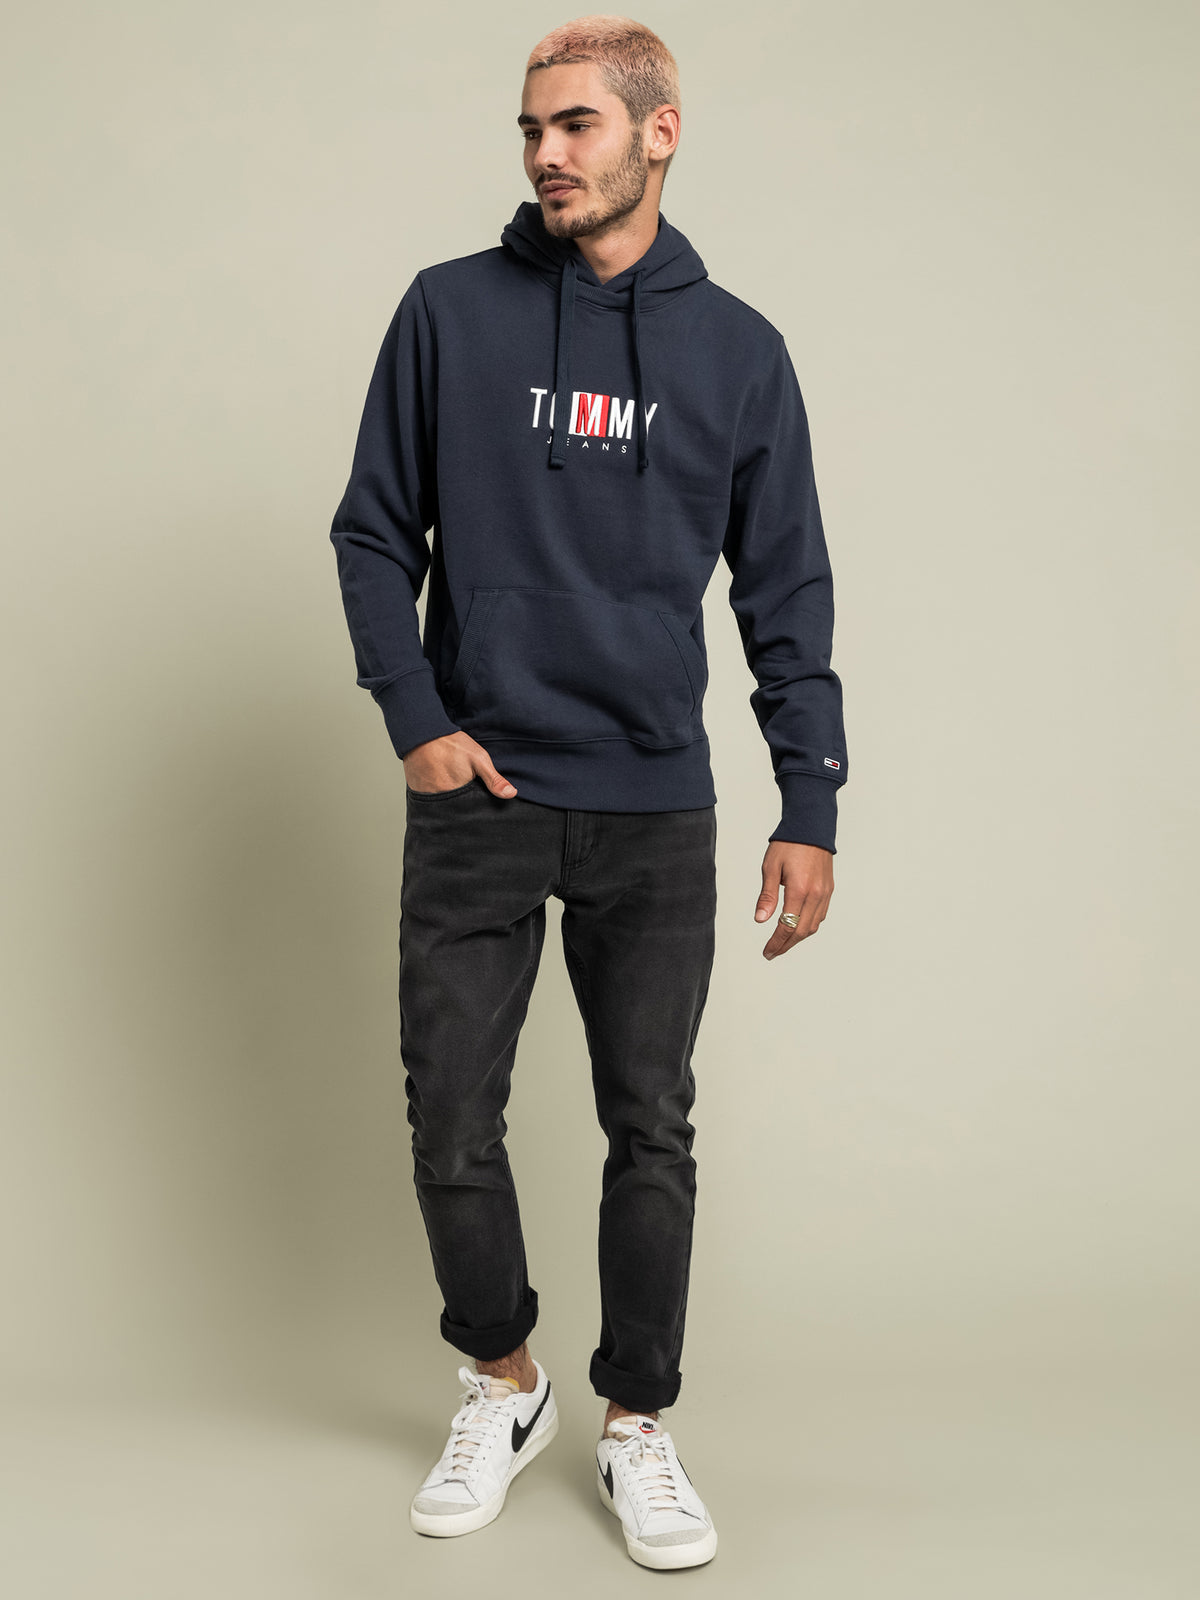 Timeless Tommy Hoodie in Navy